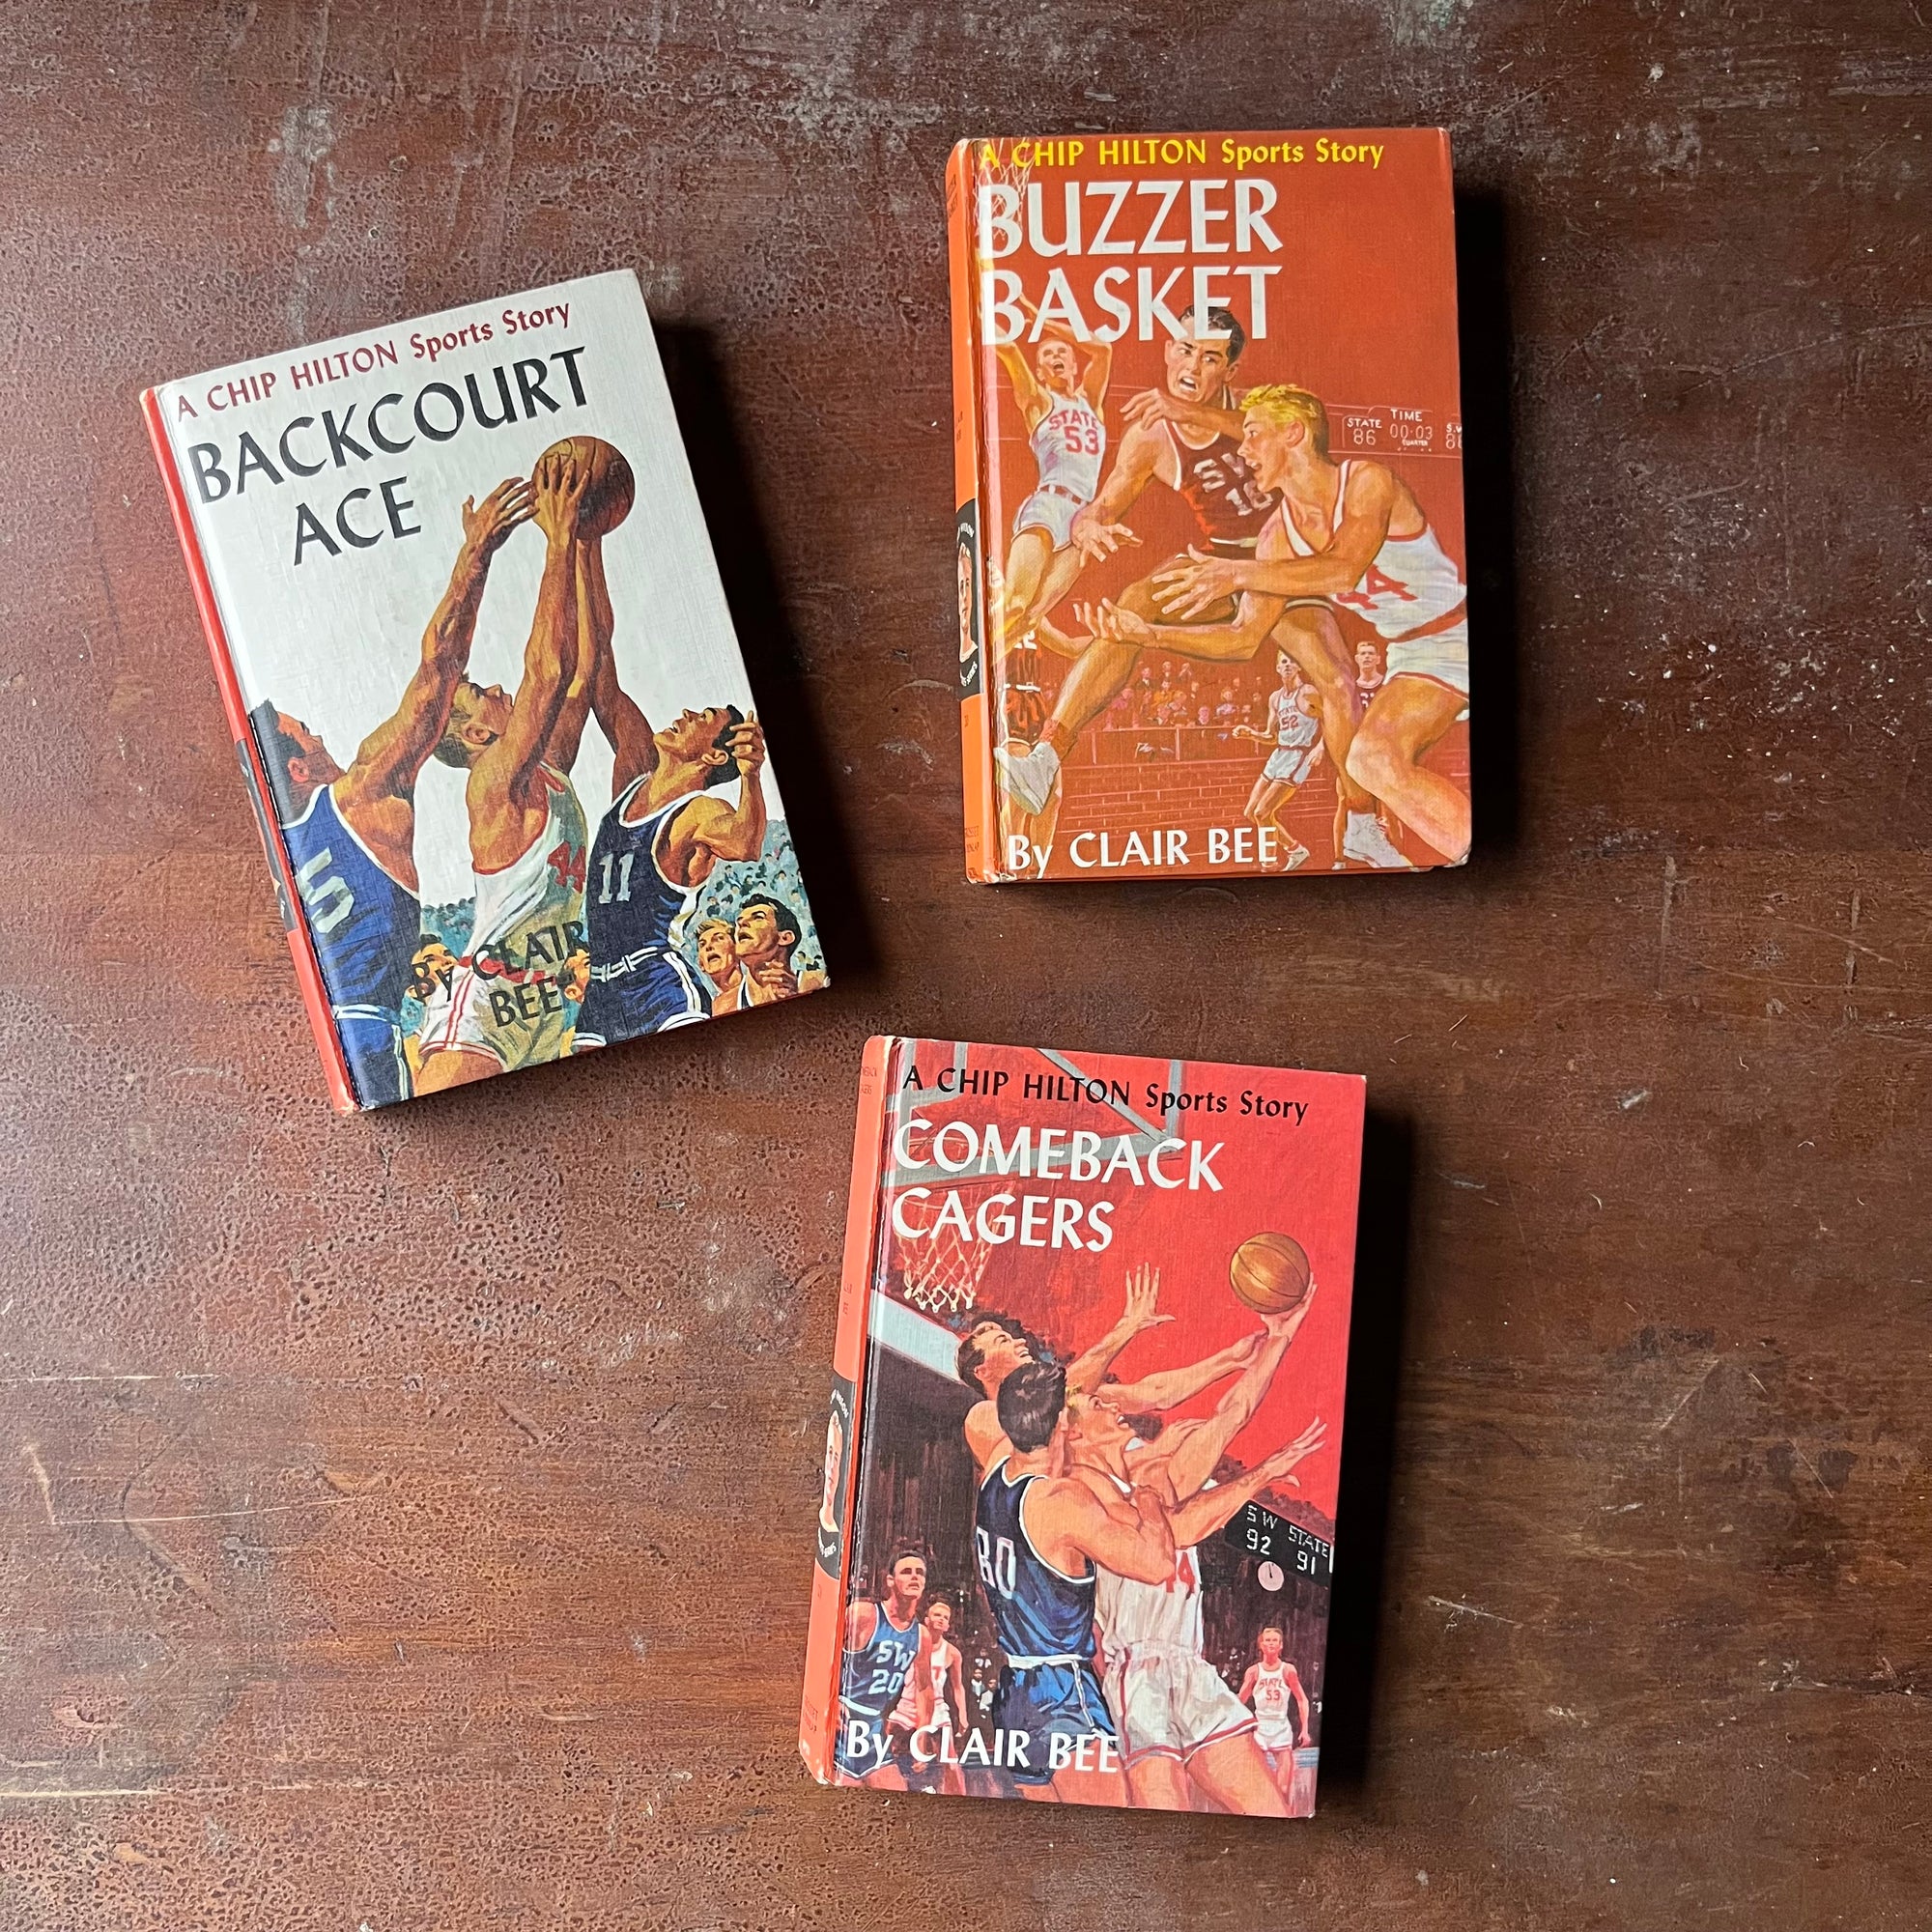 A Chip Hilton Sports Story Book Set-Backcourt Ace, Buzzer Basket & Comeback Cagers by Clair Bee-vintage children's chapter books-view of the front covers with images of teams playing basketball